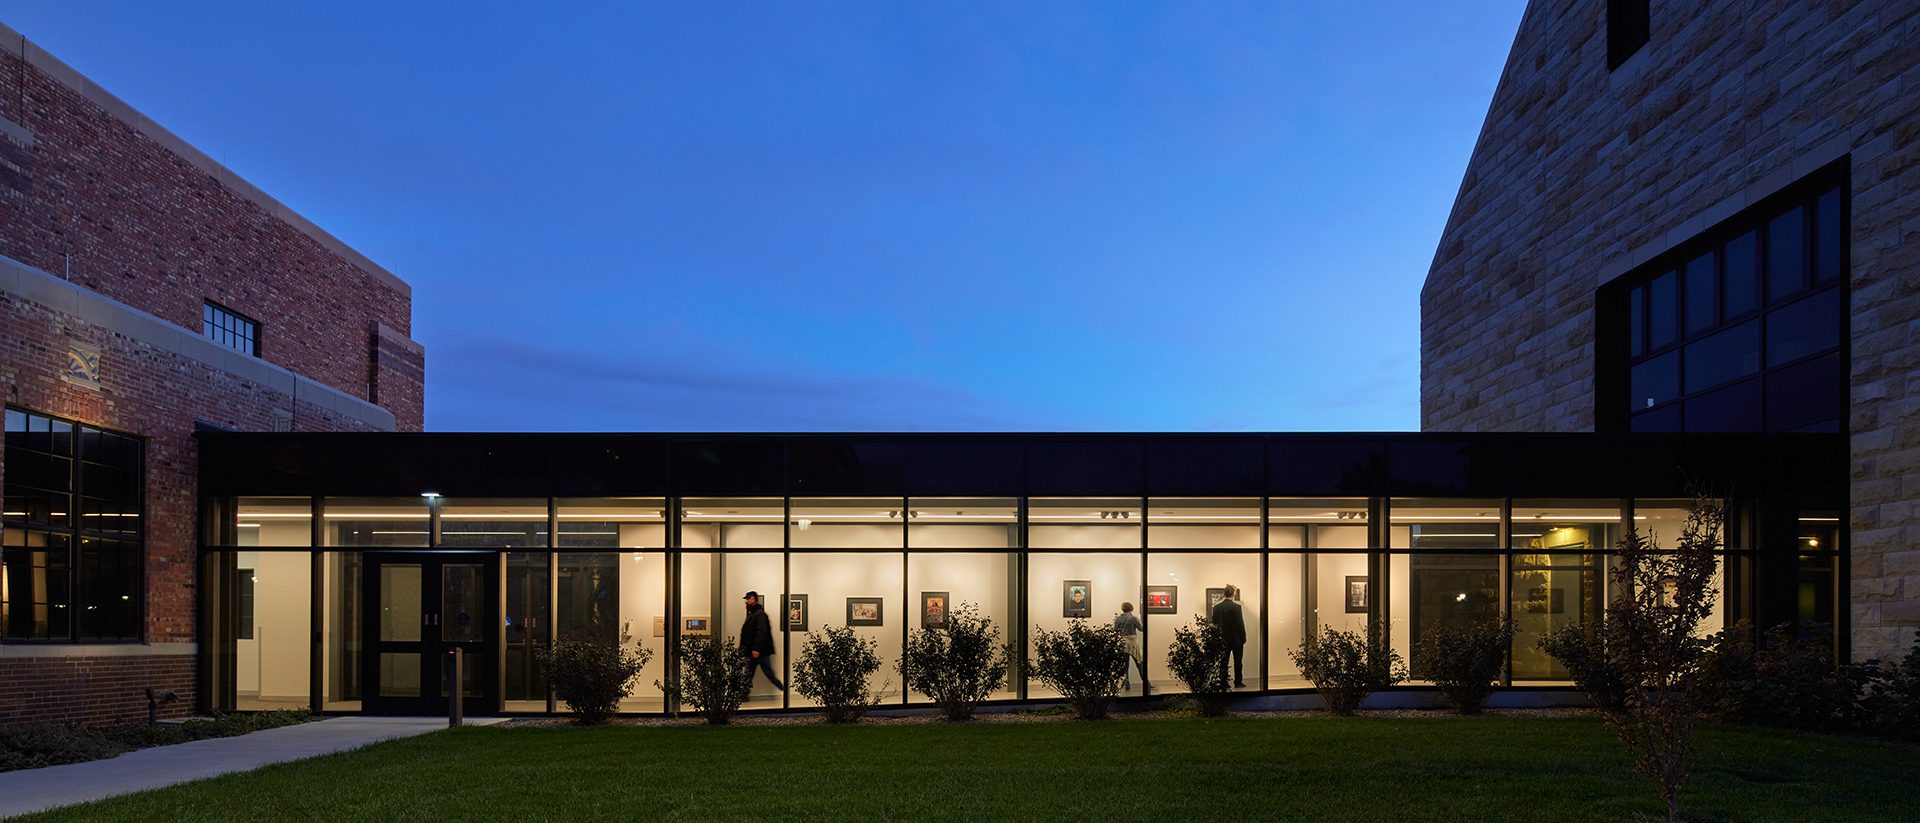 Exterior photo at dusk of the enclosed glazed walkway that connects the Schmidt Foundation Center for Art & Design to the Moss-Thorns Gallery.